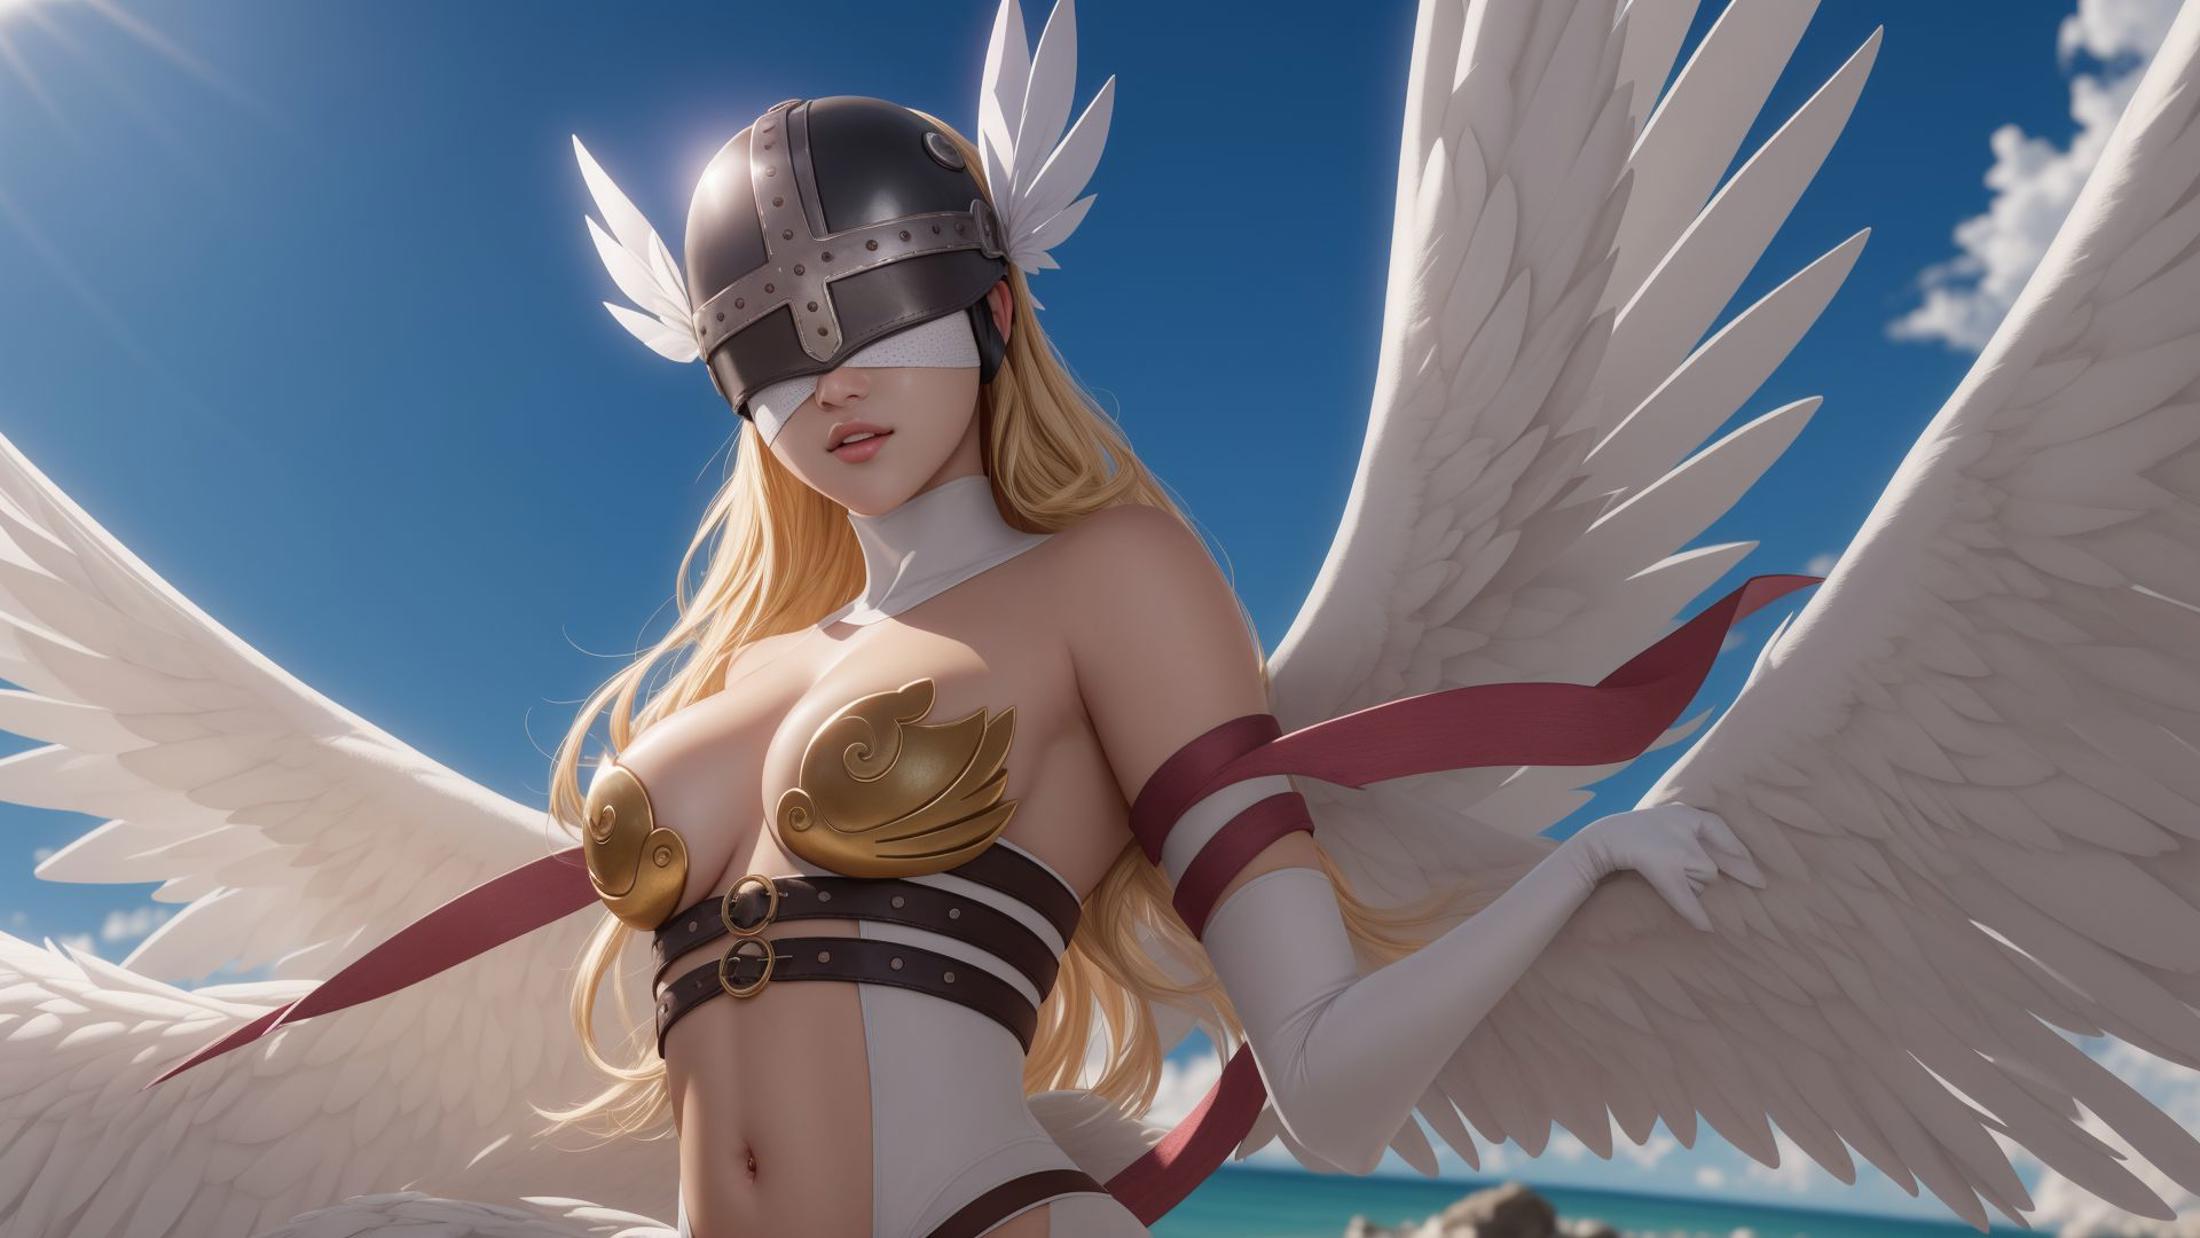 Angewomon - Digimon image by marusame